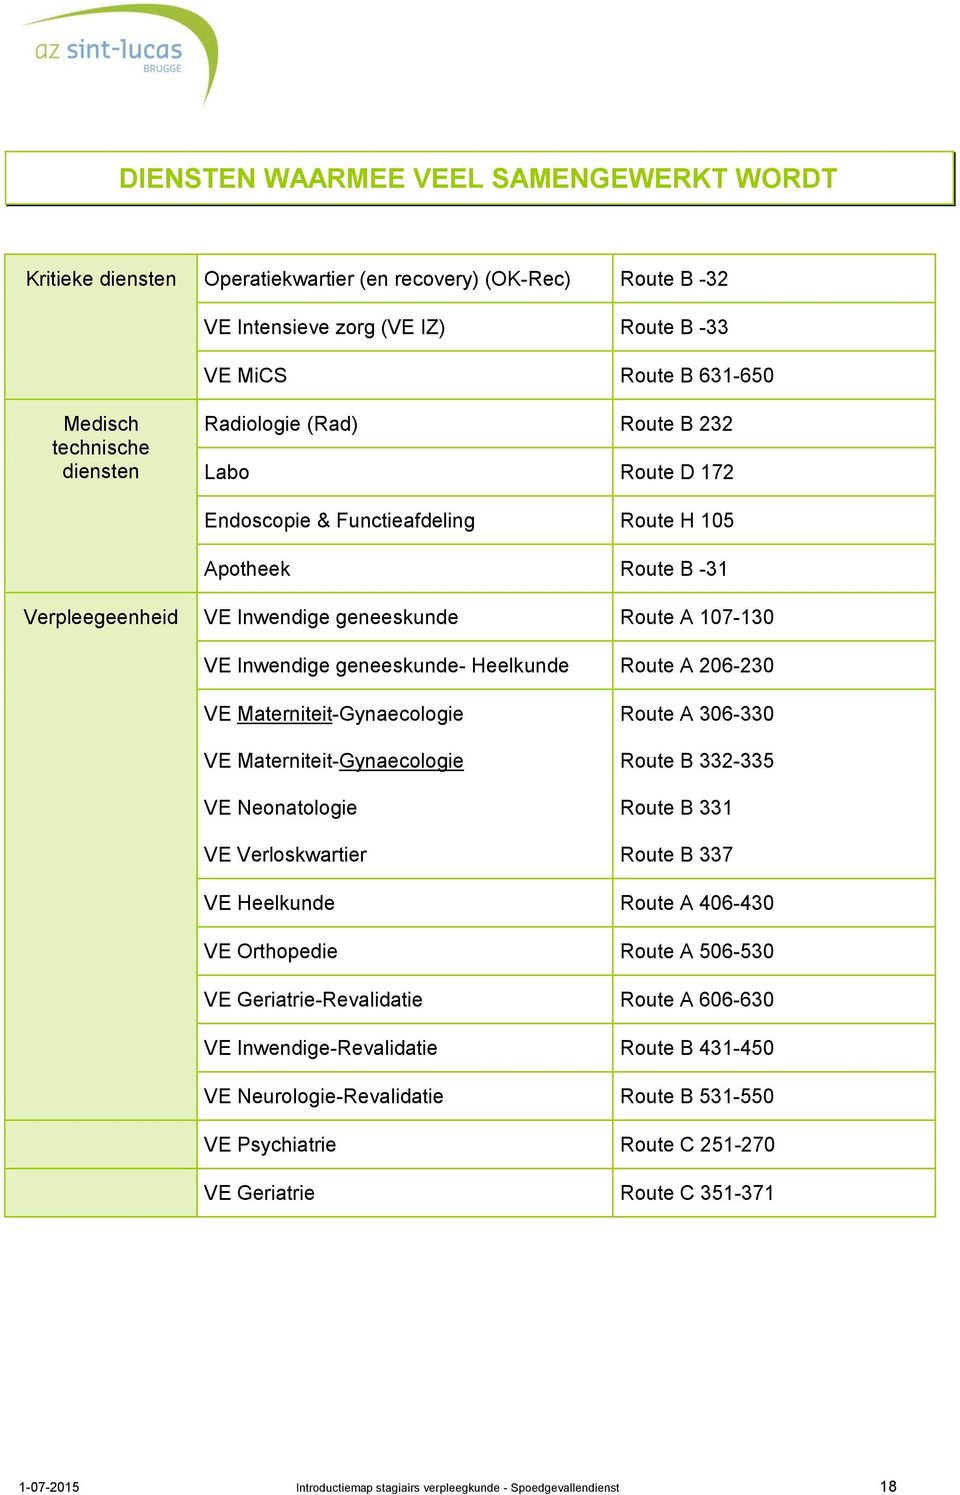 Heelkunde Route A 206-230 VE Materniteit-Gynaecologie VE Materniteit-Gynaecologie VE Neonatologie VE Verloskwartier Route A 306-330 Route B 332-335 Route B 331 Route B 337 VE Heelkunde Route A